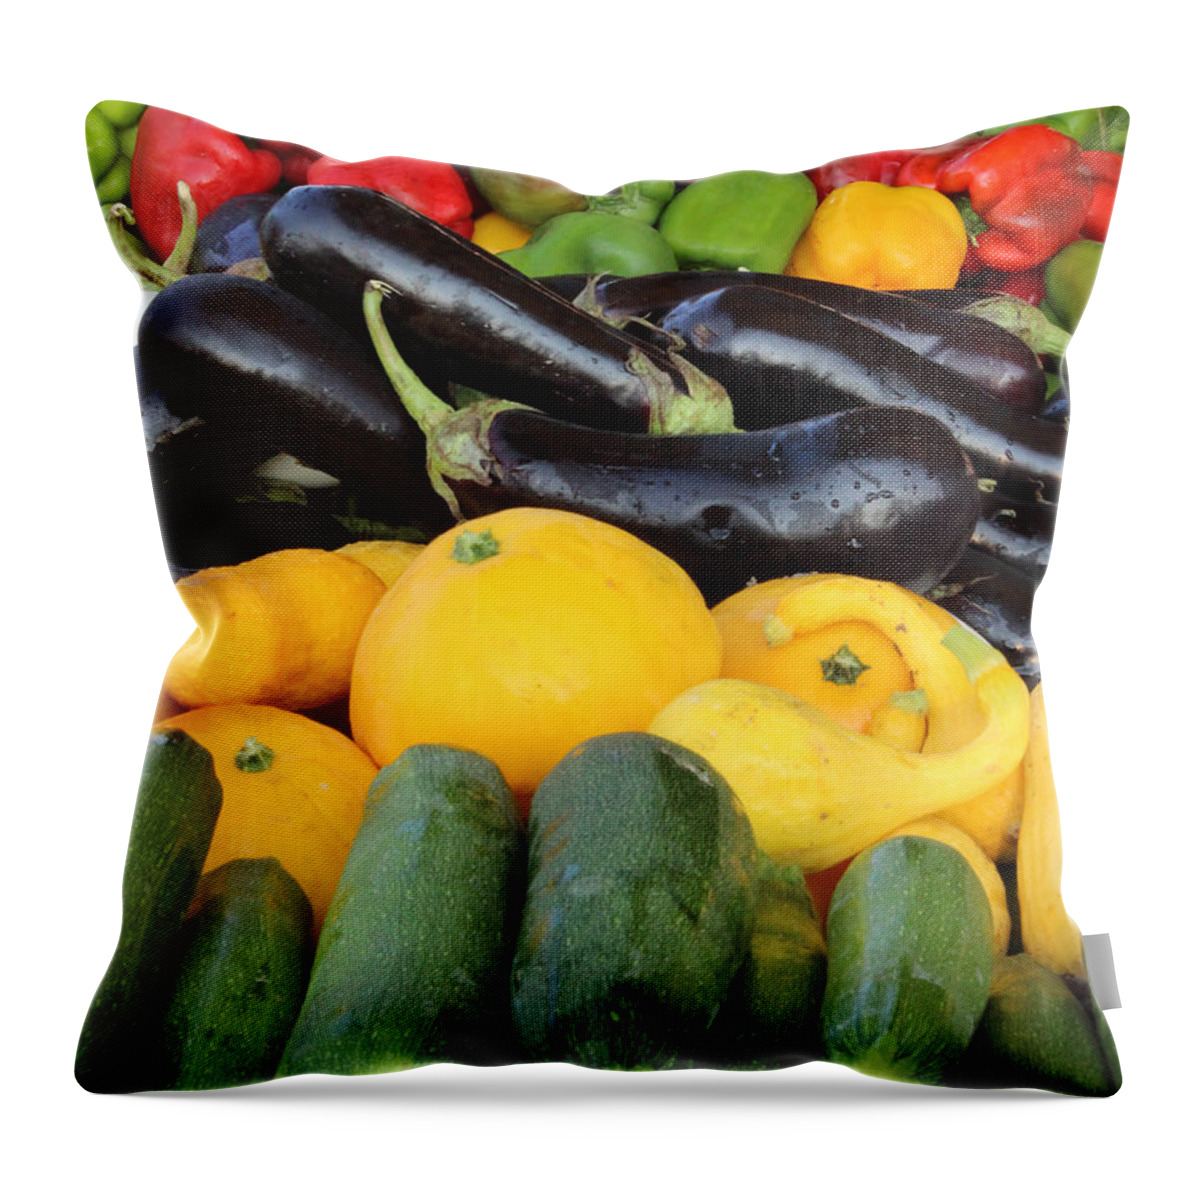 Food And Beverages Throw Pillow featuring the photograph Home-Grown Vegetables by Lena Wilhite